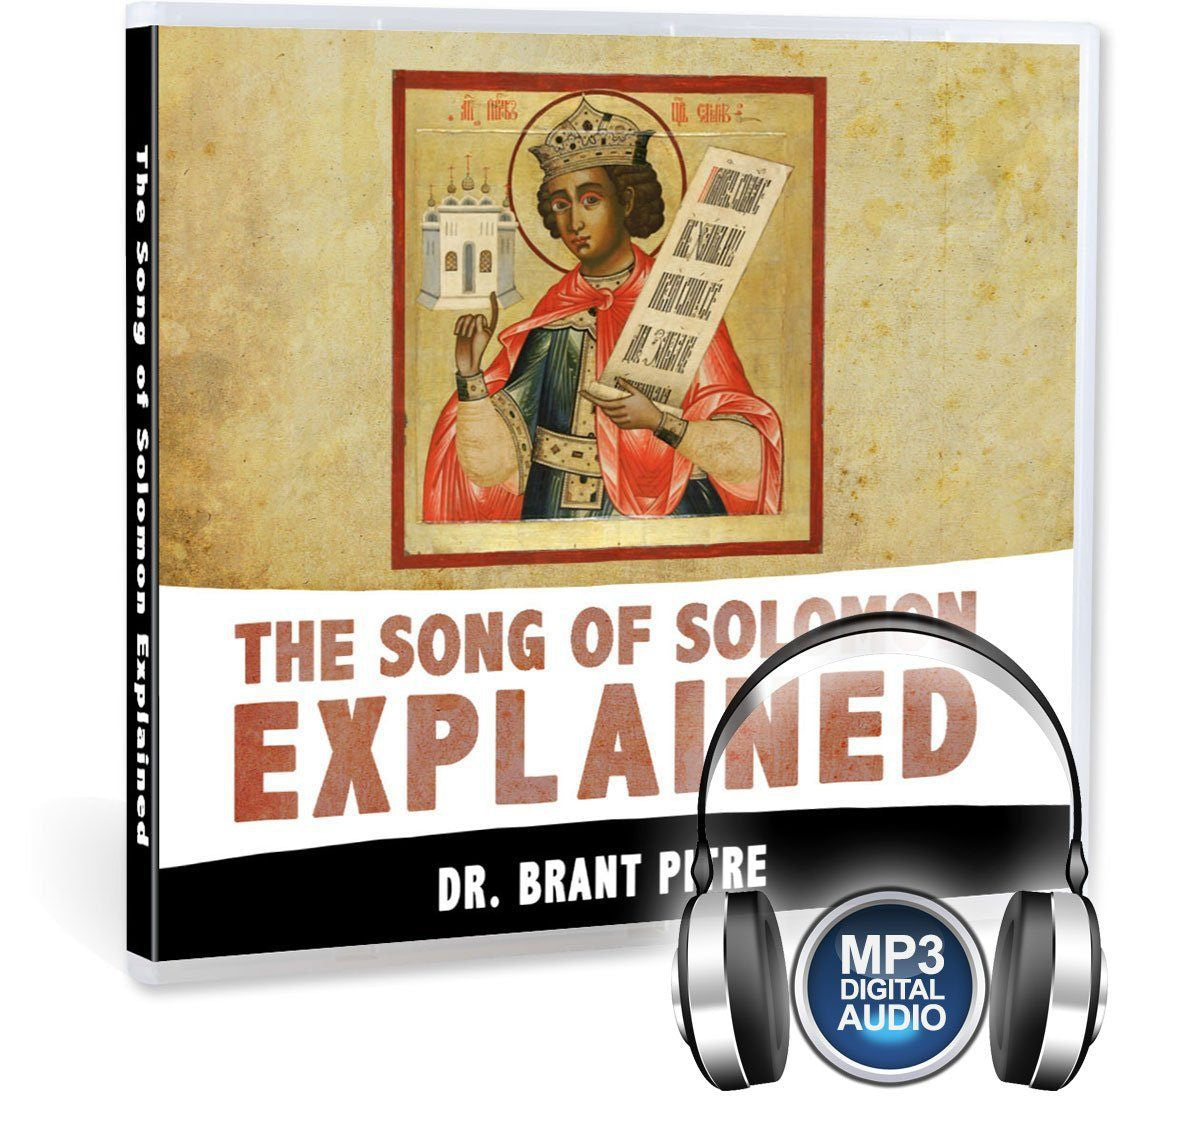 What is the Song of Solomon (also known as the Song of Songs) all about?  How did ancient Jewish audiences understand this book and what does it have to do with the end of time and the Jewish Temple (CD).